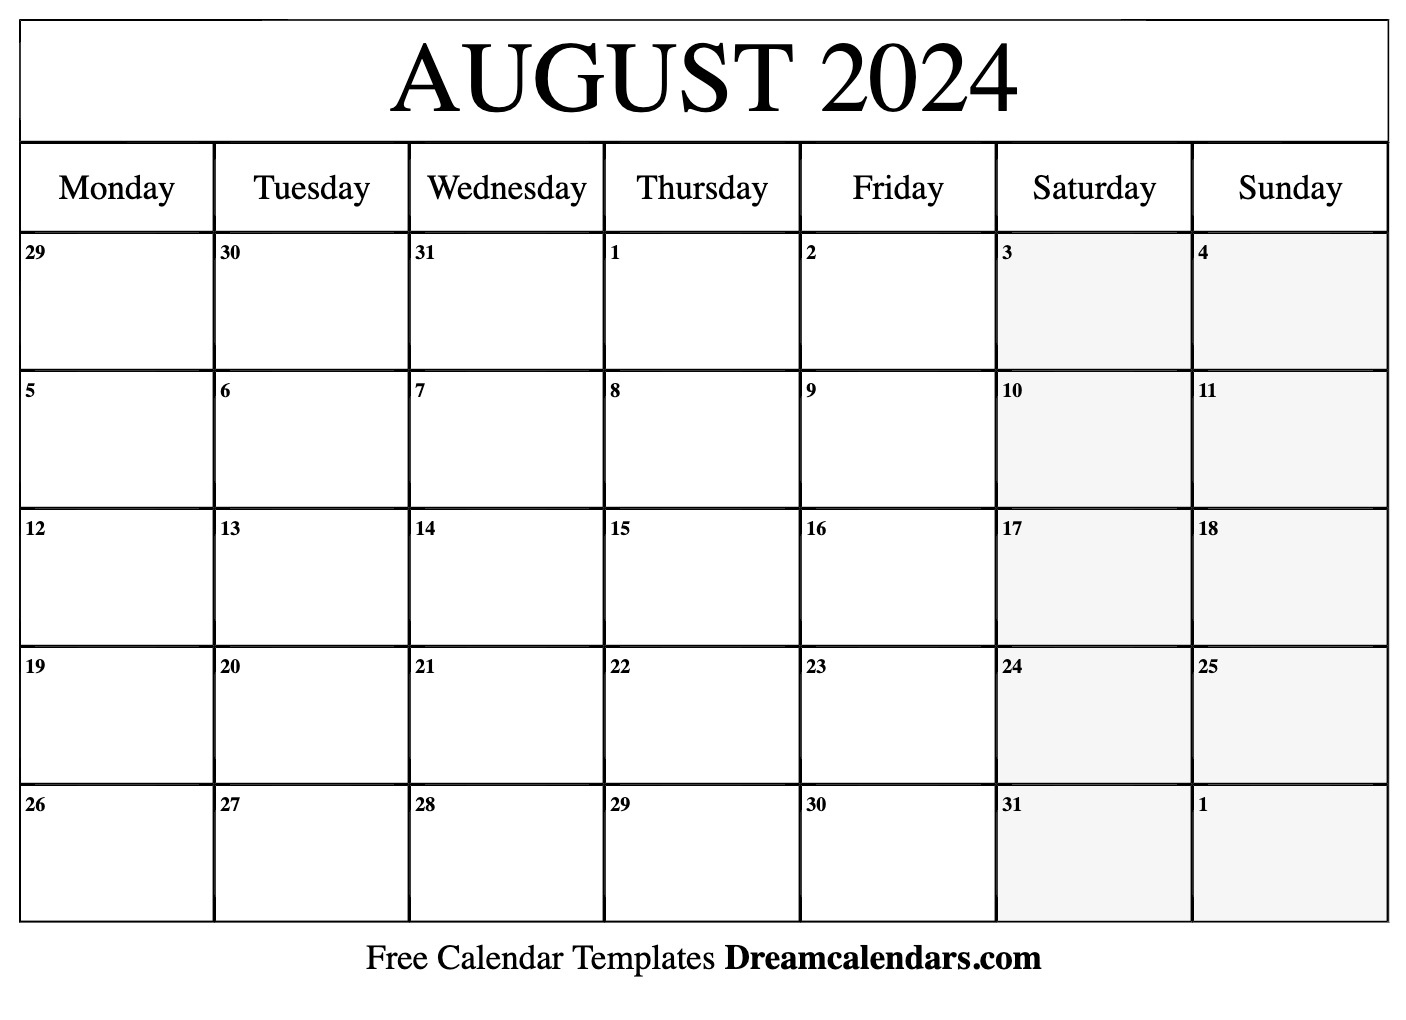 2024 August Calendar With Holidays Template Free Printfree Calendar 2024 - Free Printable Calendar Aug Coloring Pages 2024